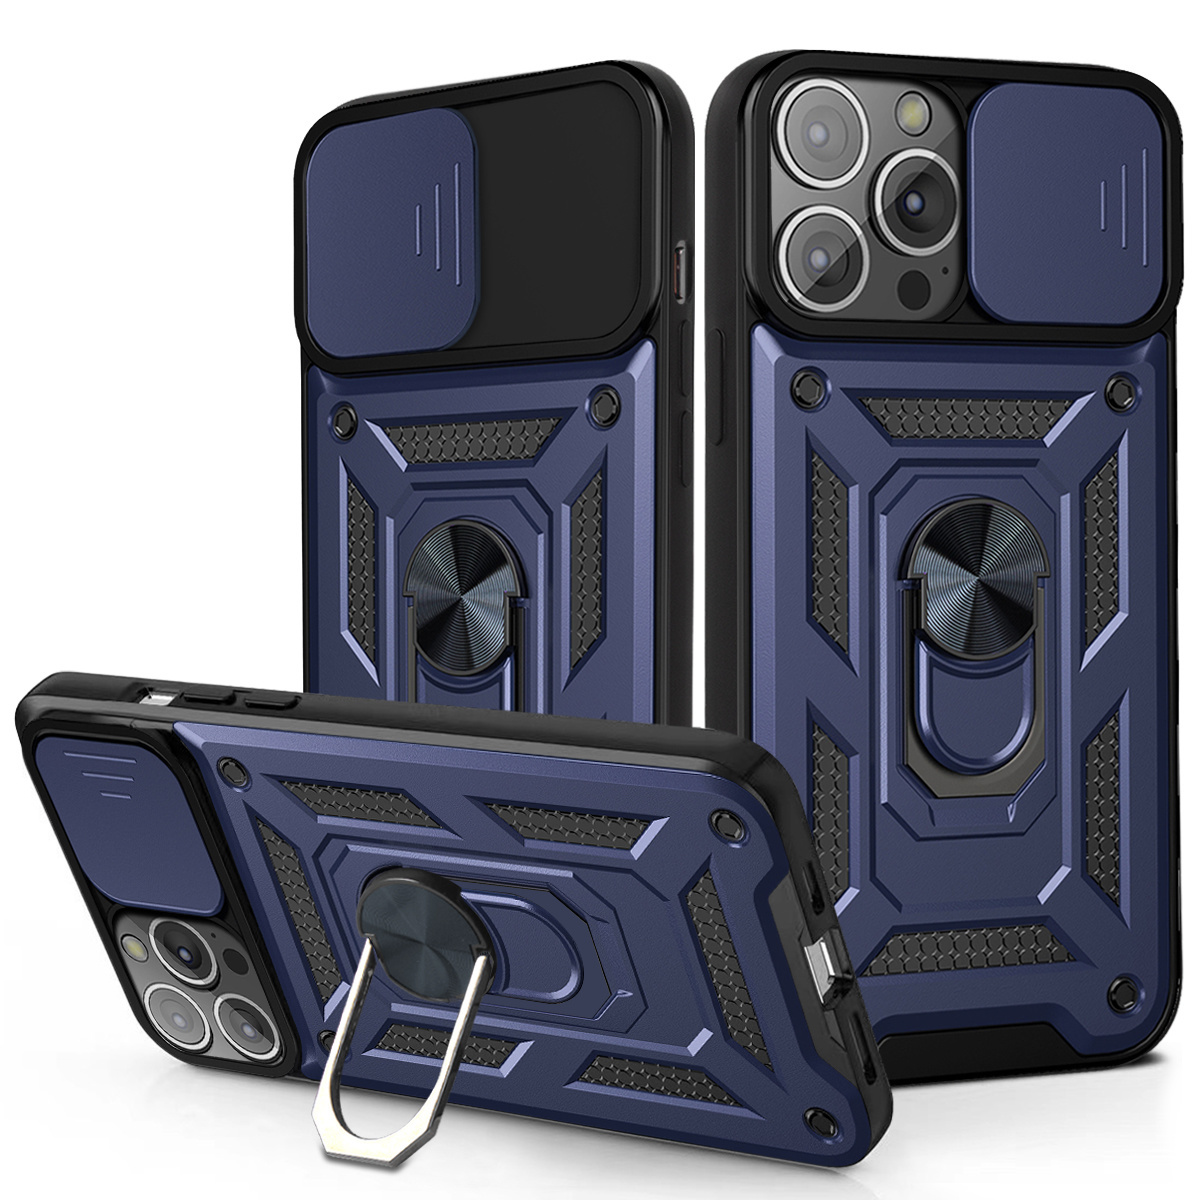 iPhone 13 Pro Max Rugged Armor Back Cover Hoesje met Camera Bescherming - Stevig - Heavy Duty - TPU - Apple iPhone 13 Pro Max - Blauw